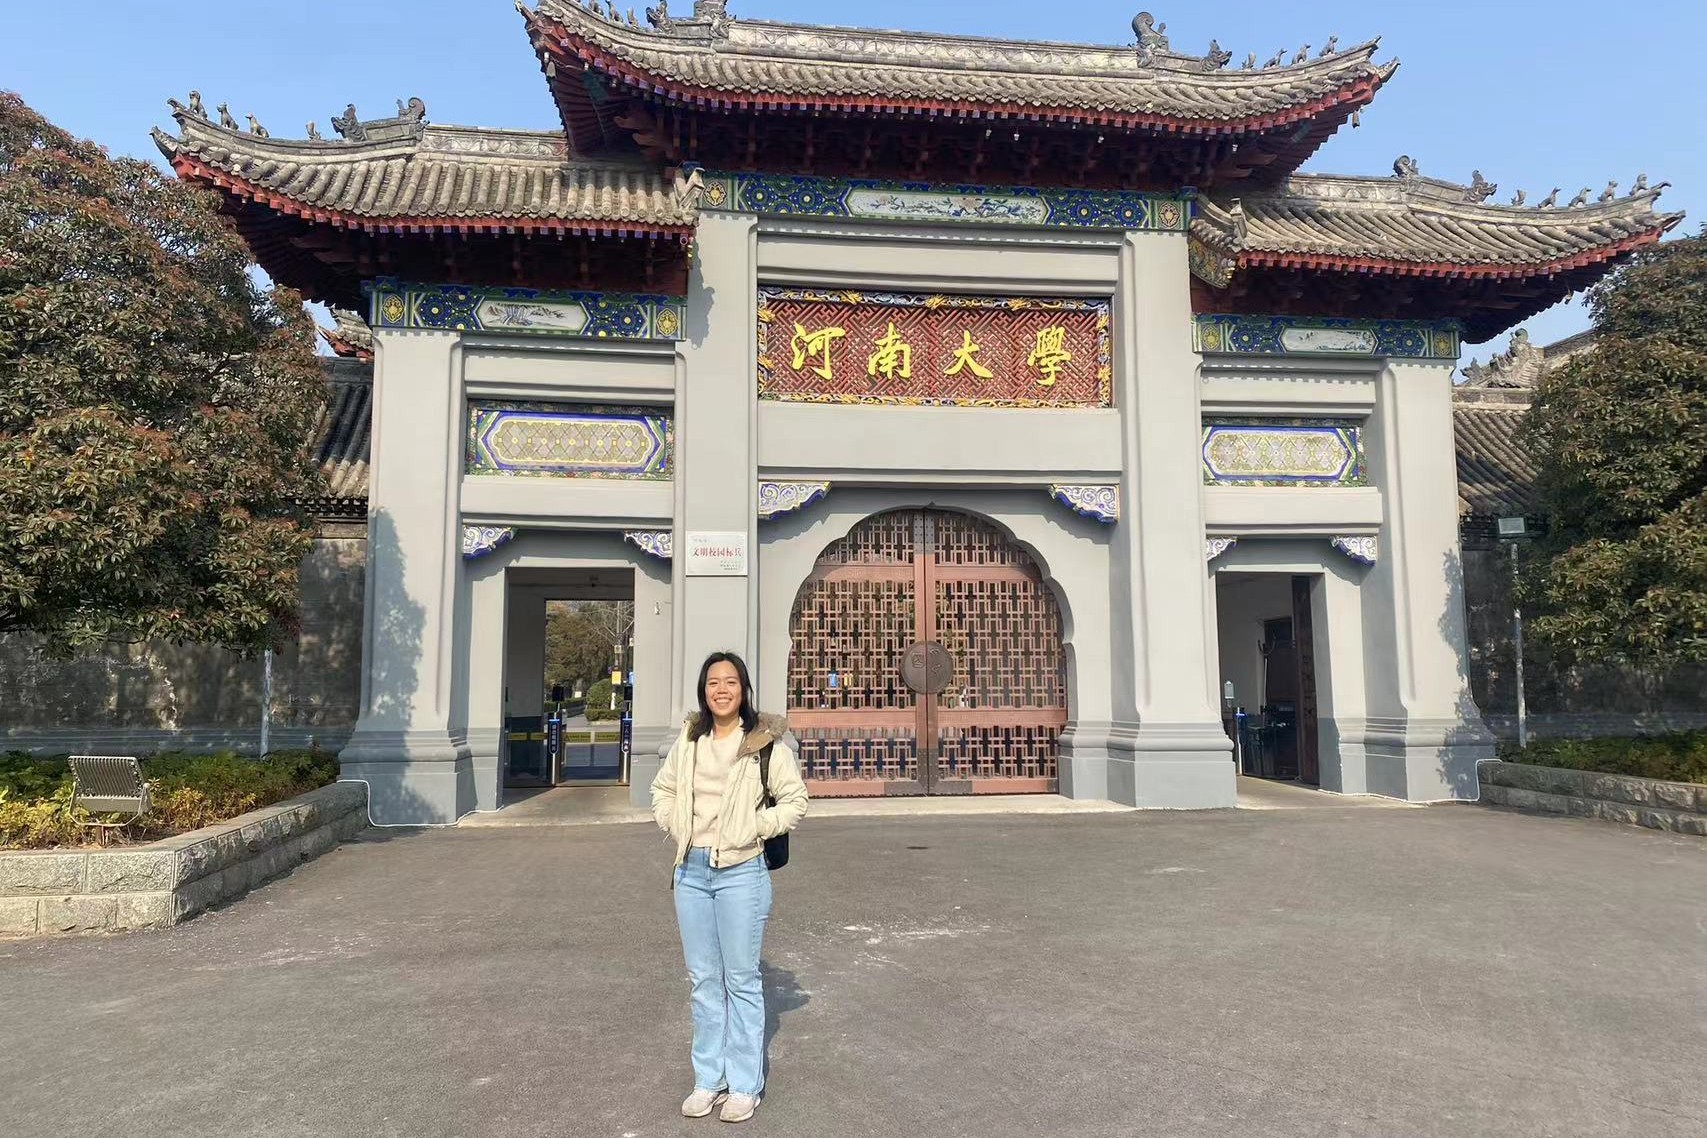 Joanna in front of the main gate of Henan University.